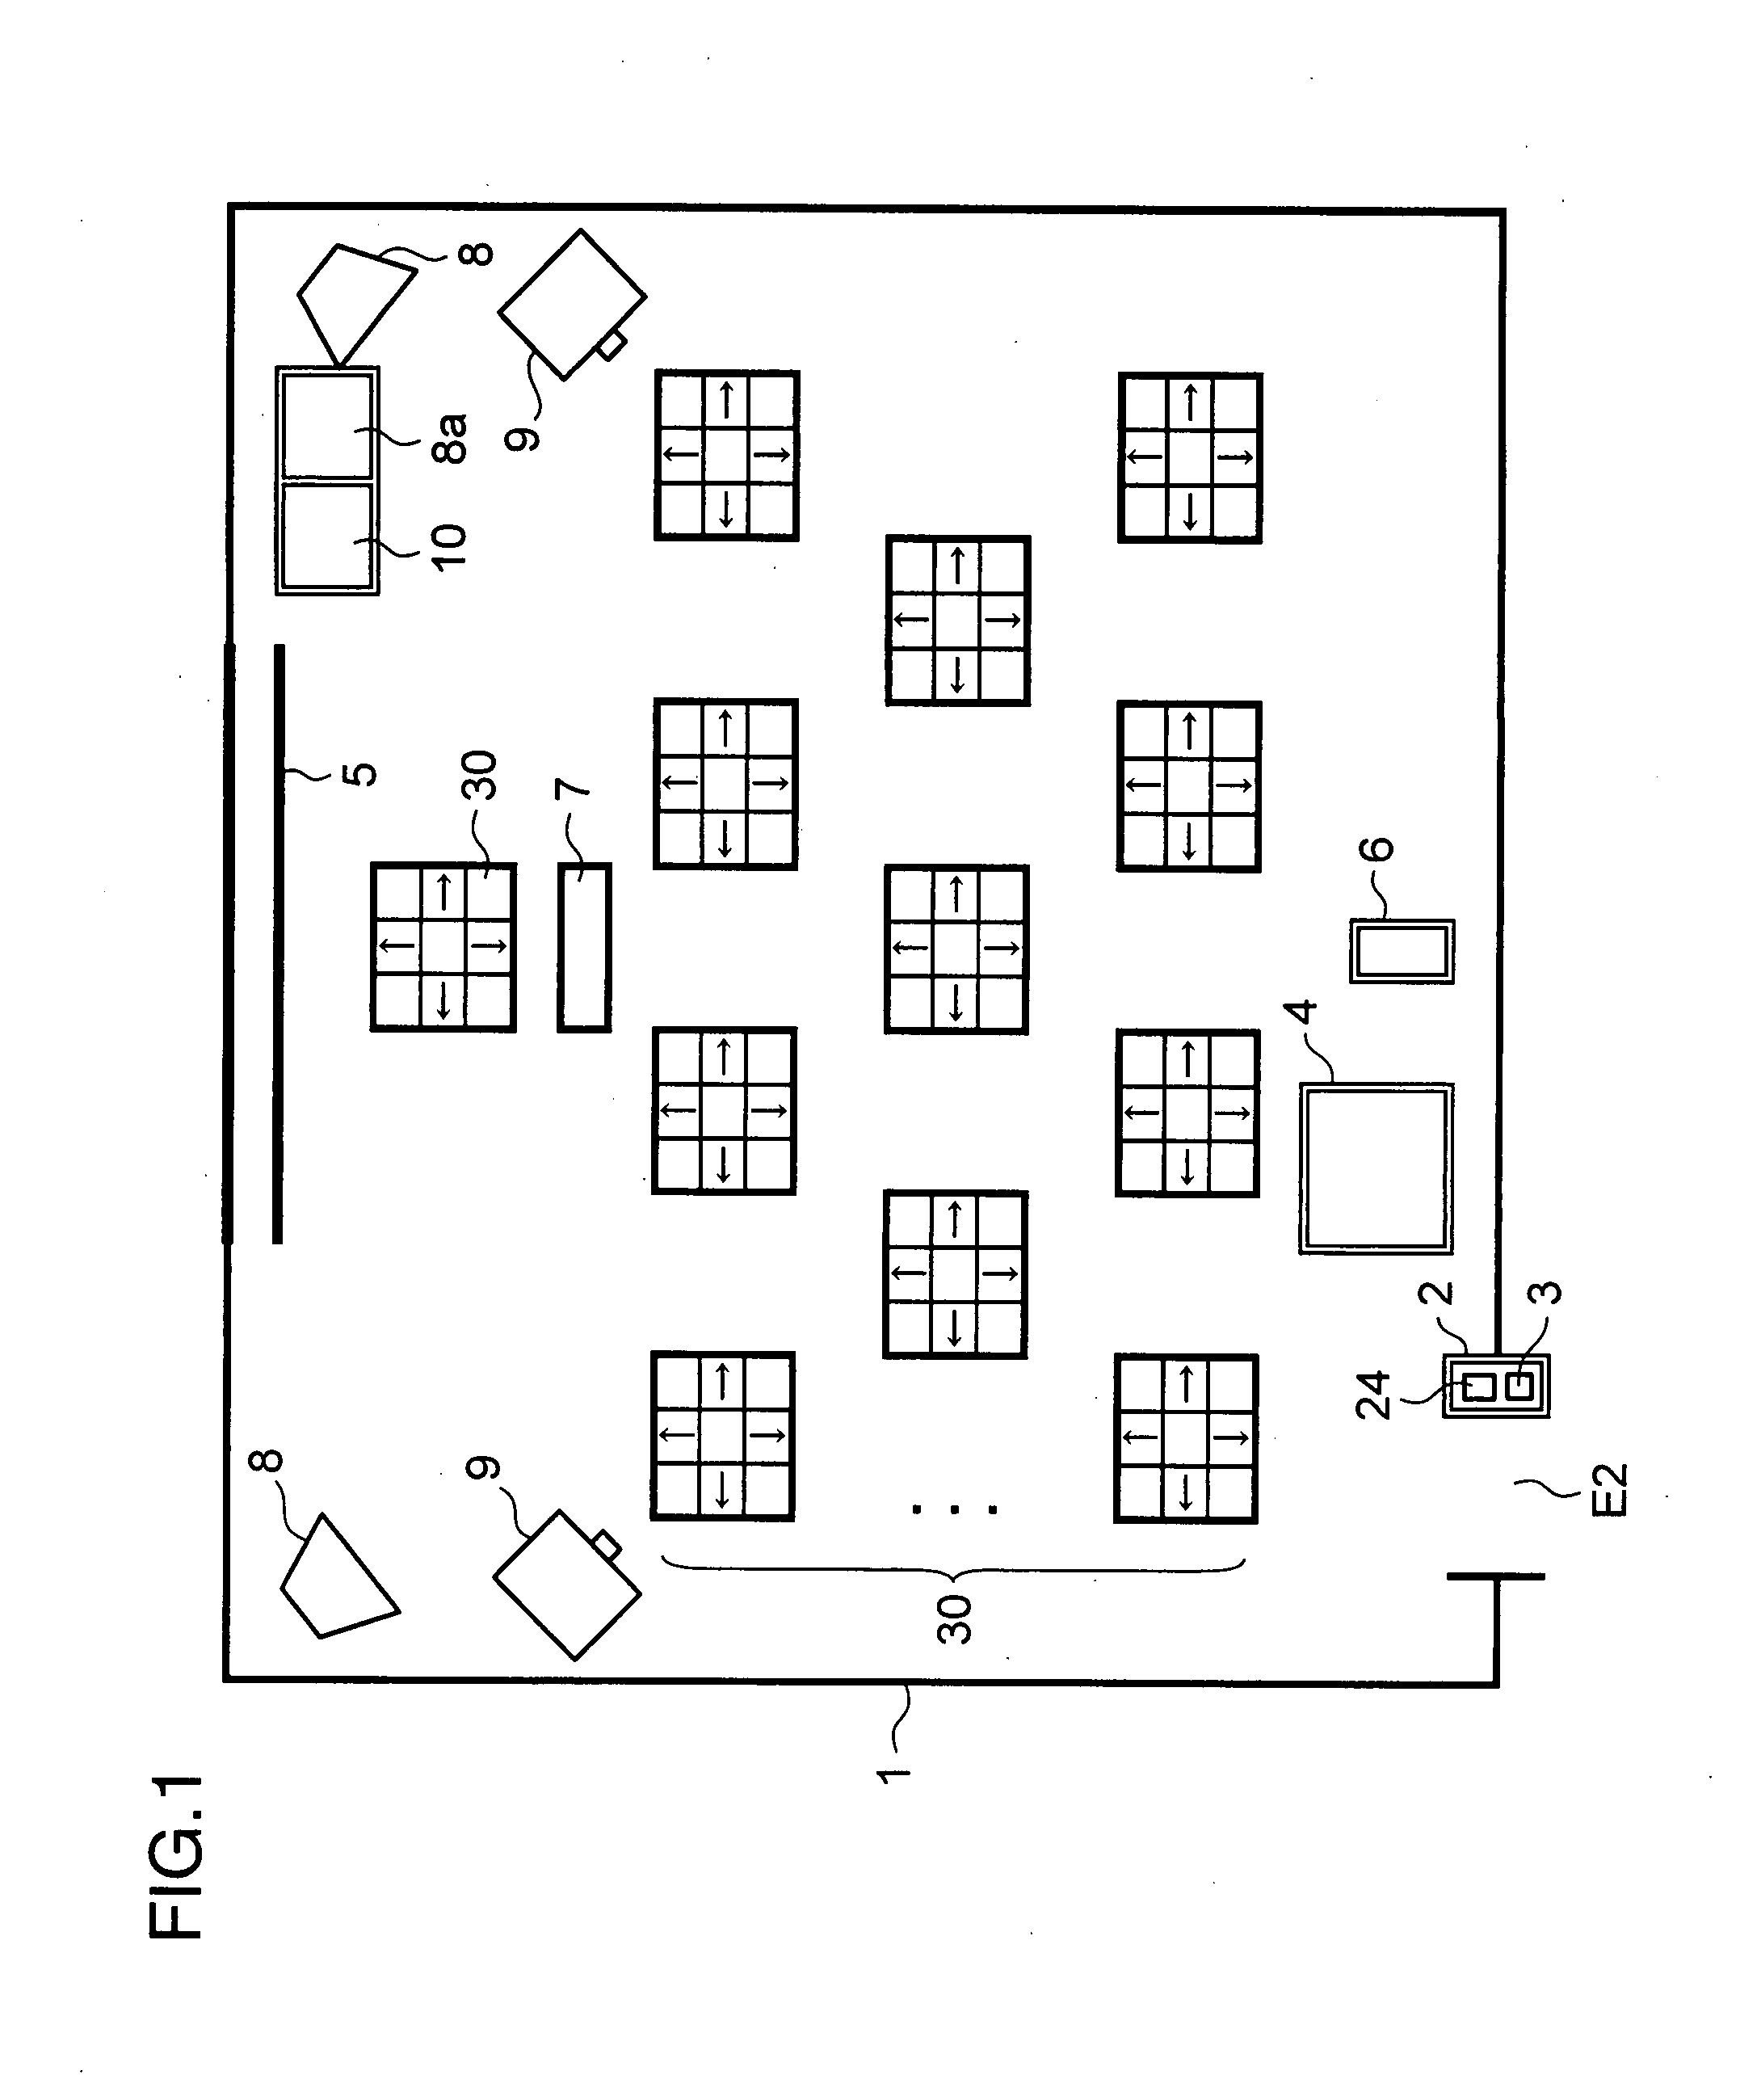 Movement Information Processing System